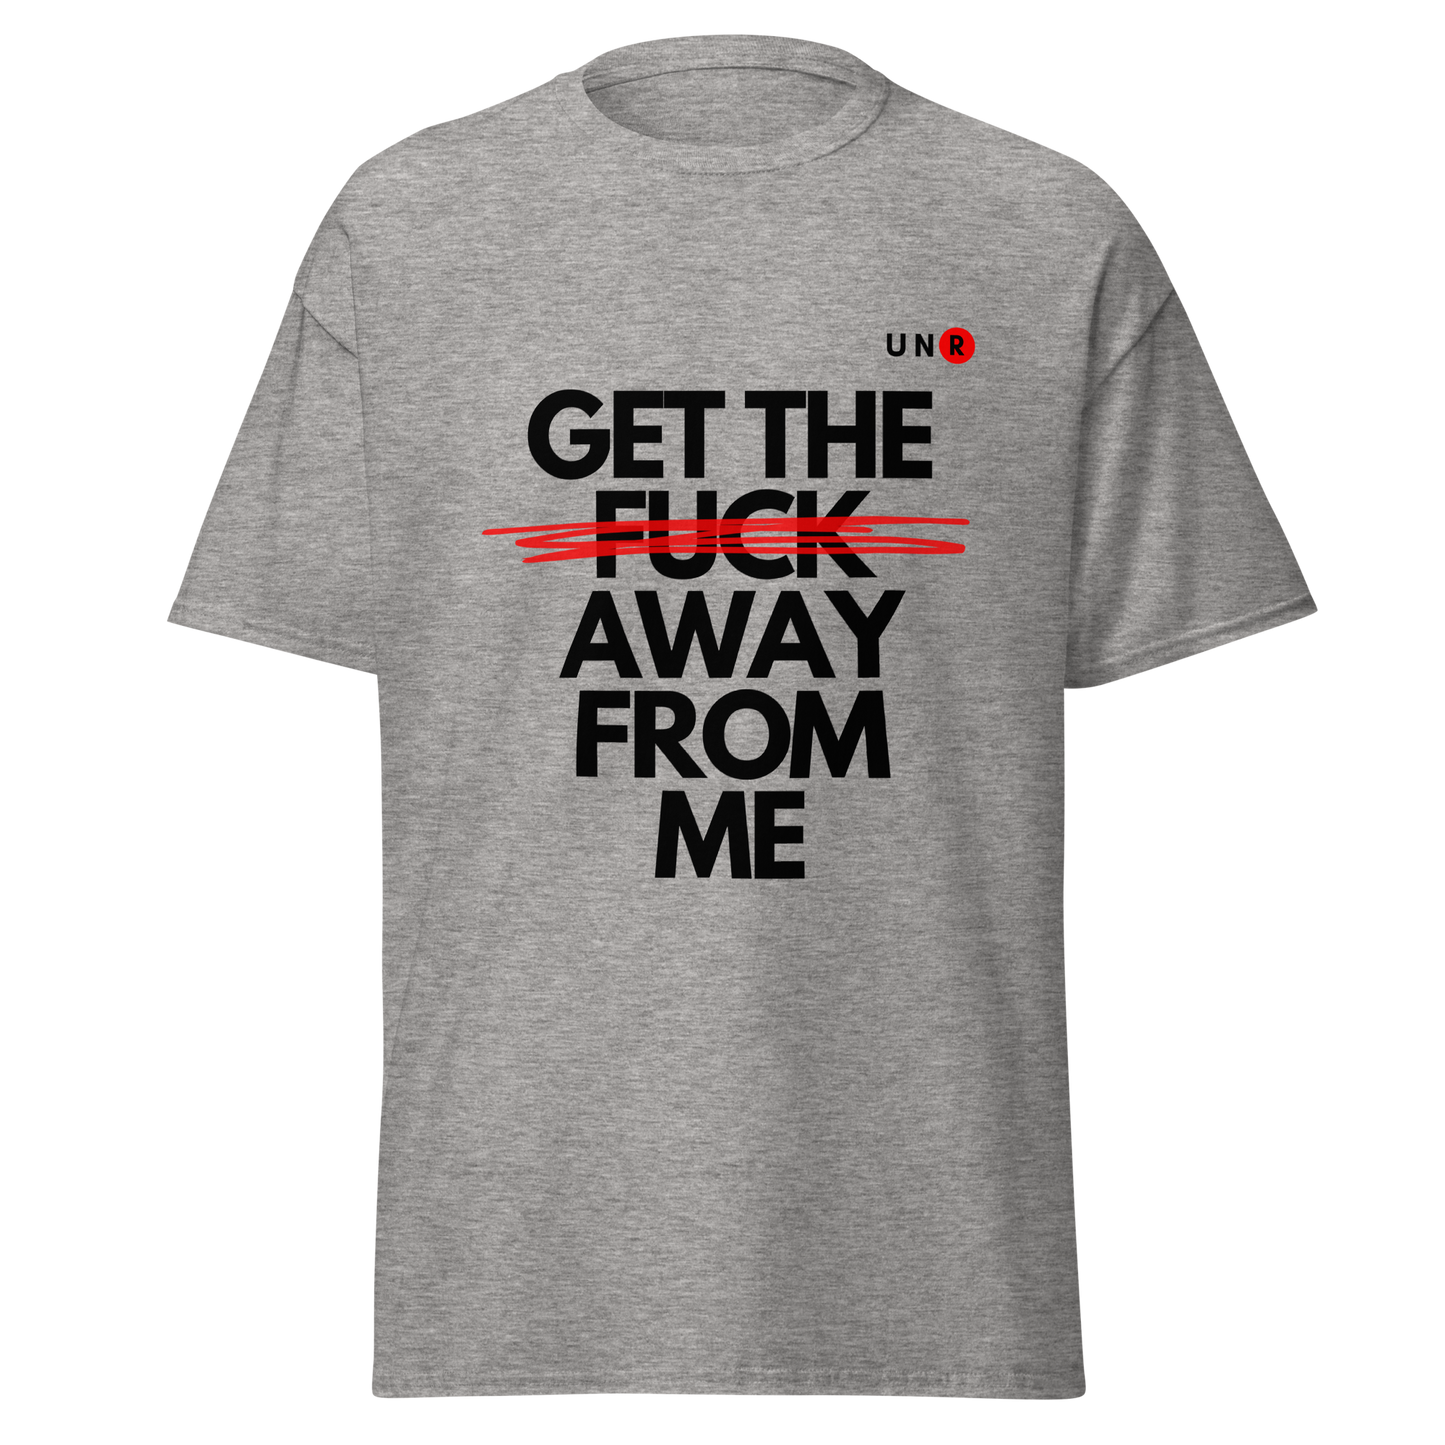 Get The Fuck Away From Me T-shirt